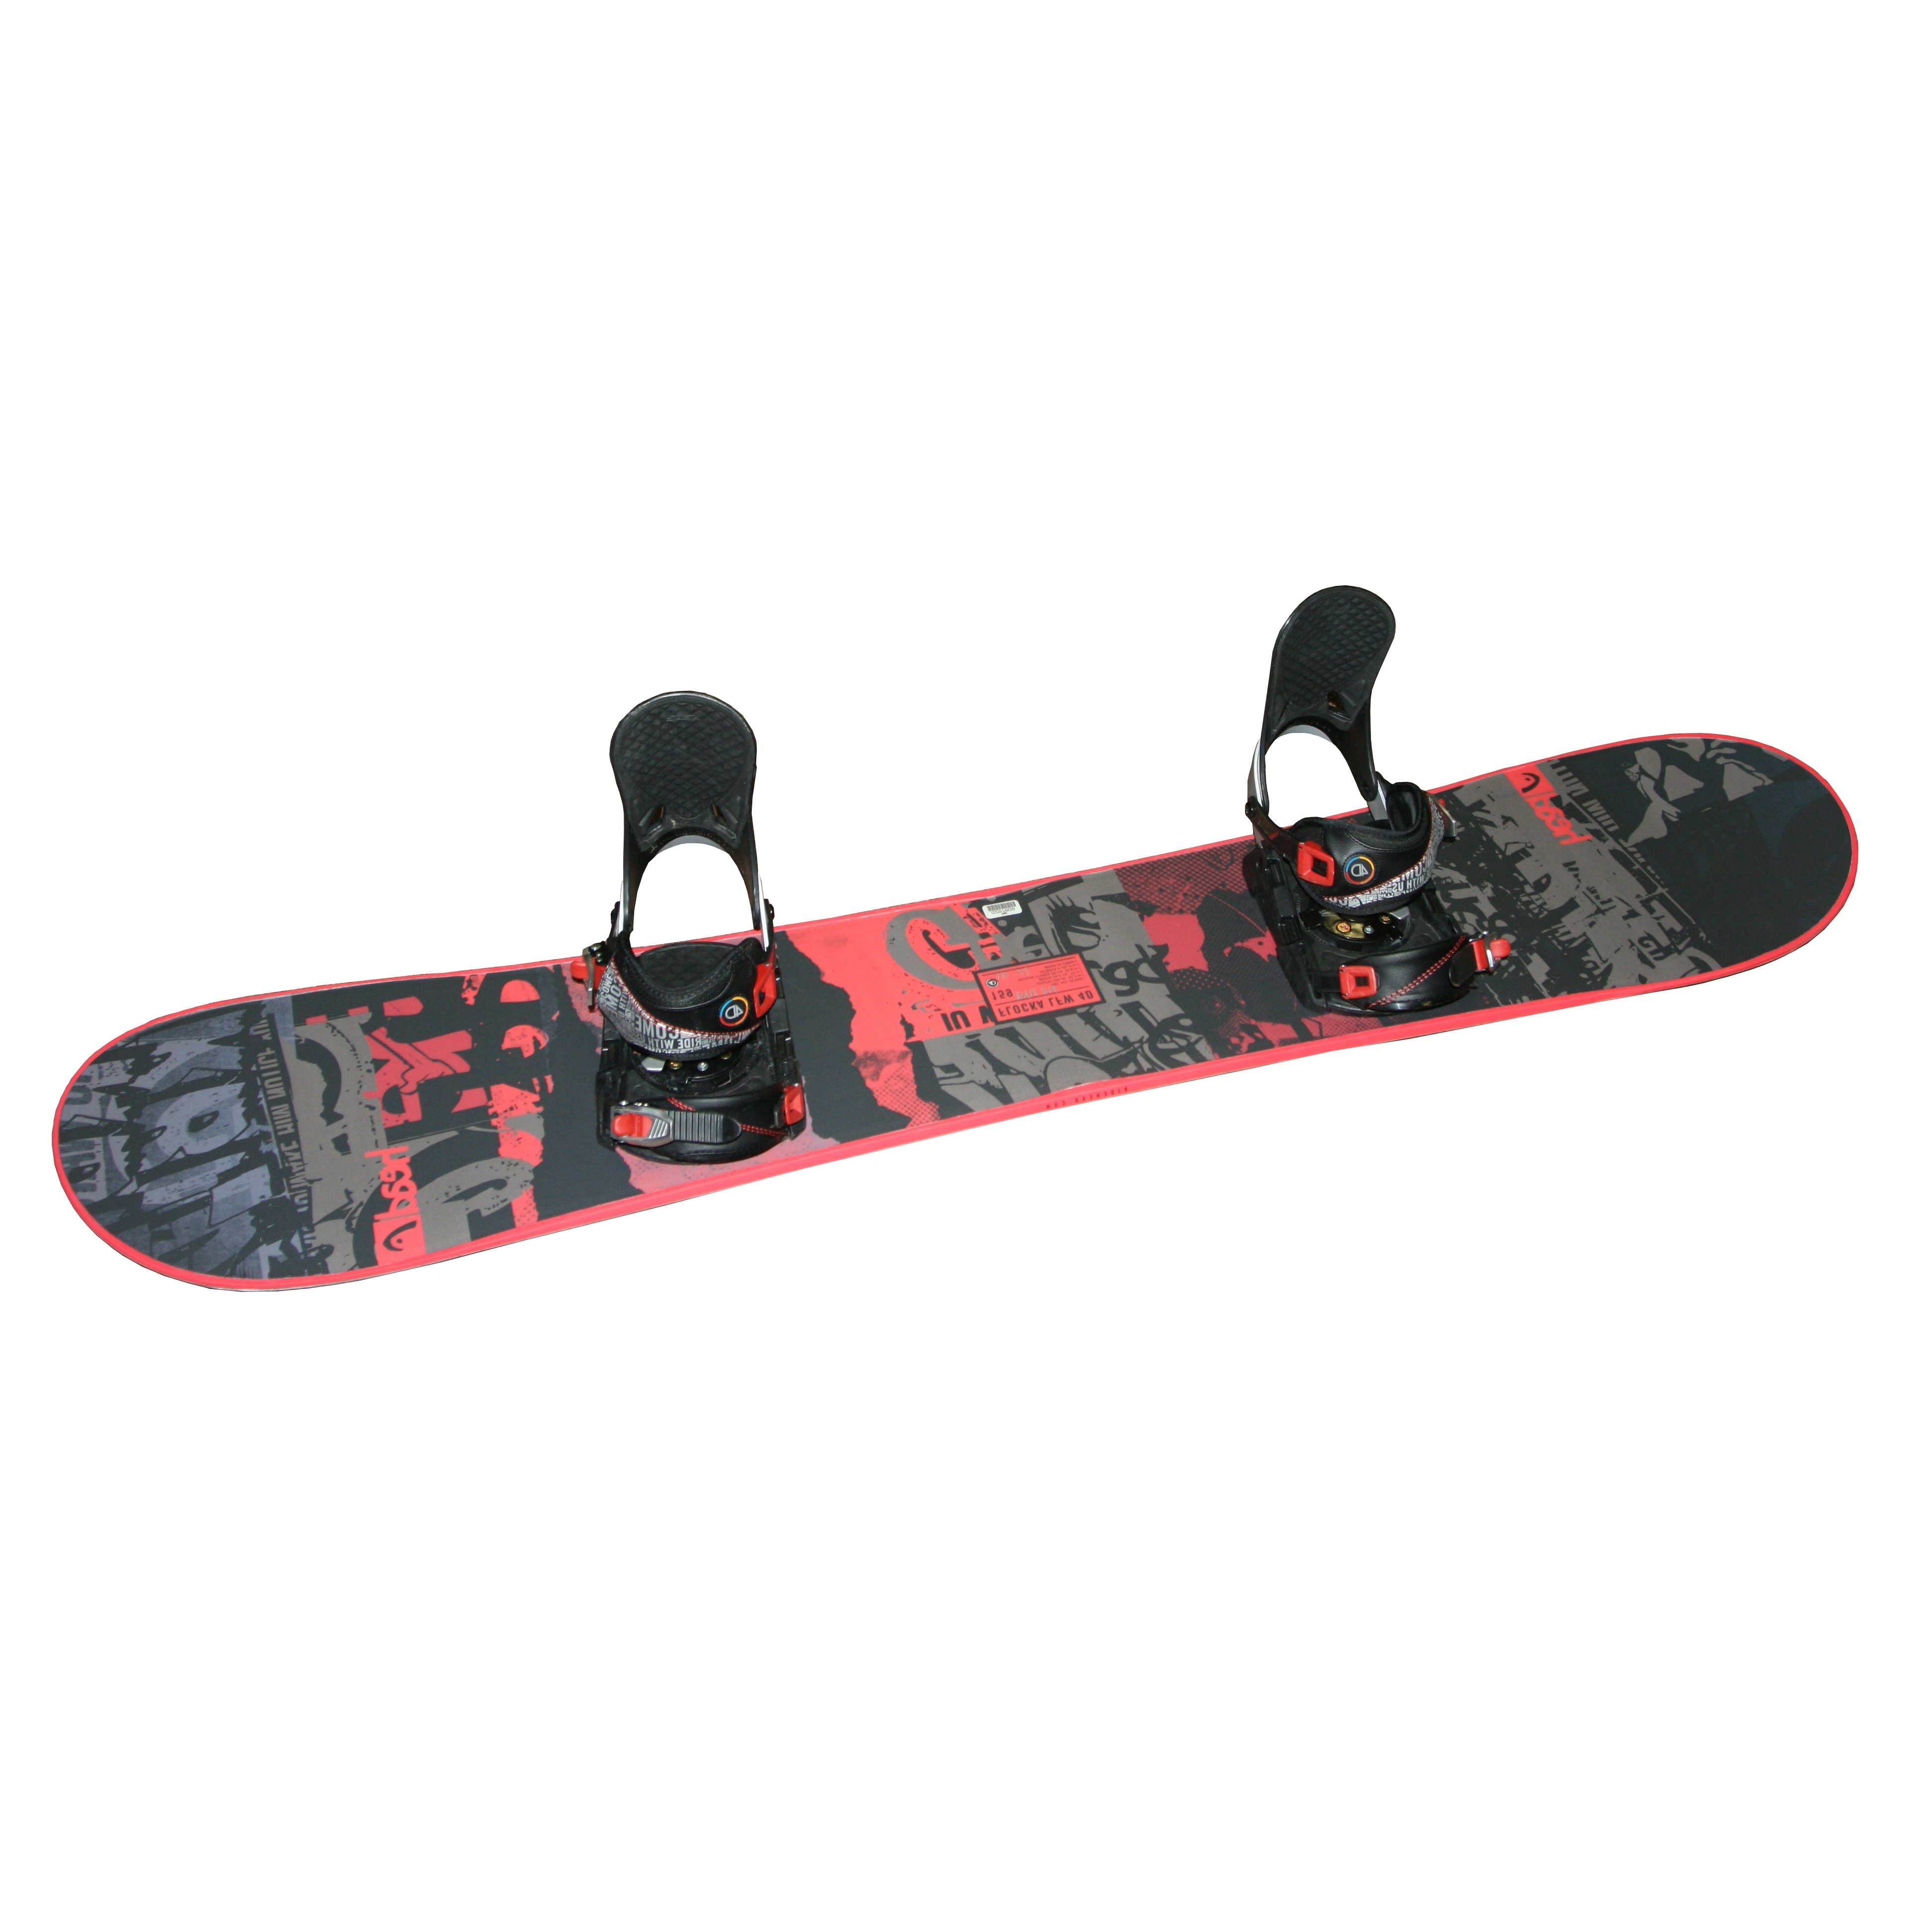 Snowboard Package – BYU Outdoors Unlimited